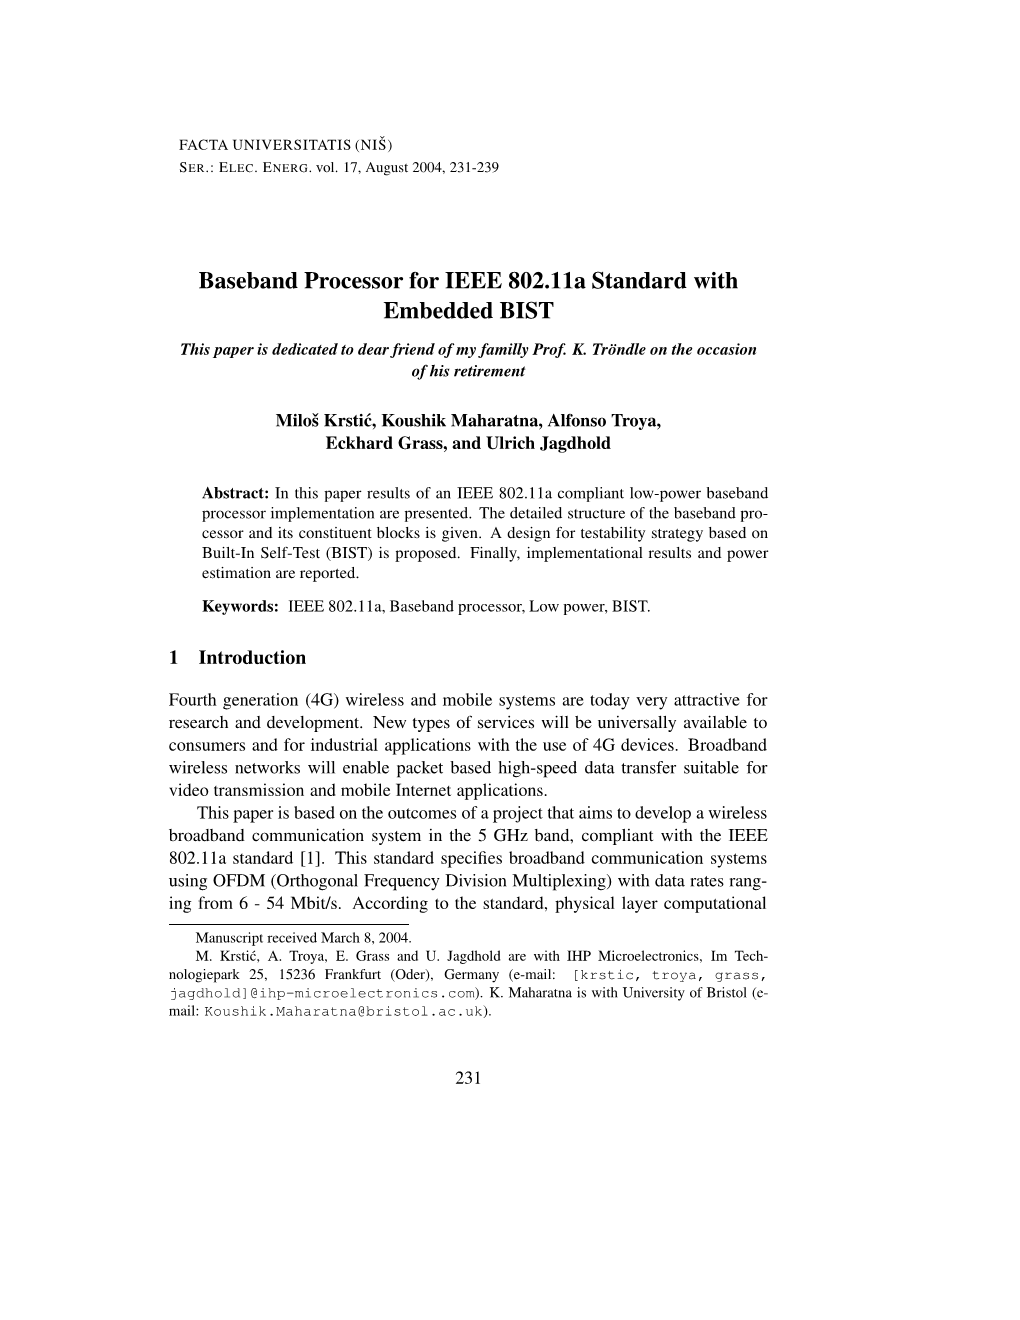 Baseband Processor for IEEE 802.11A Standard with Embedded BIST